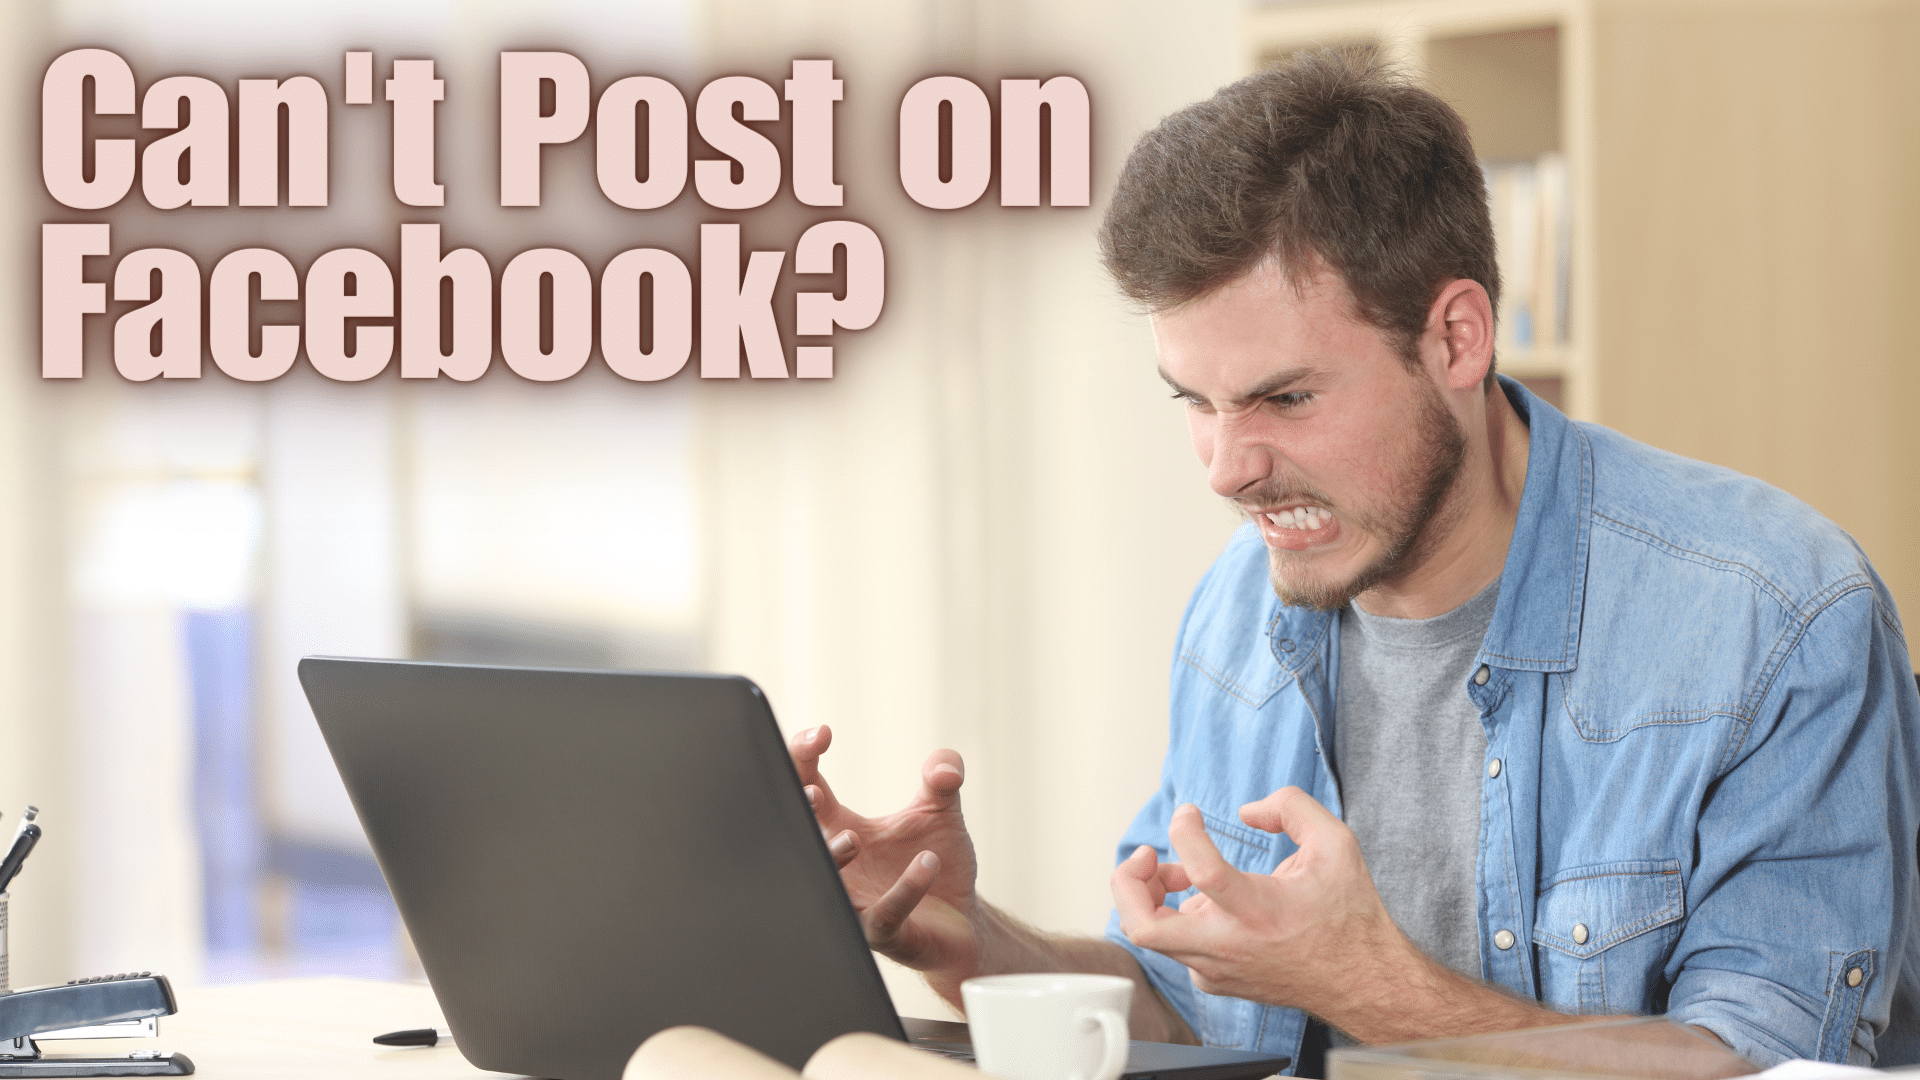 Can't Post on Facebook